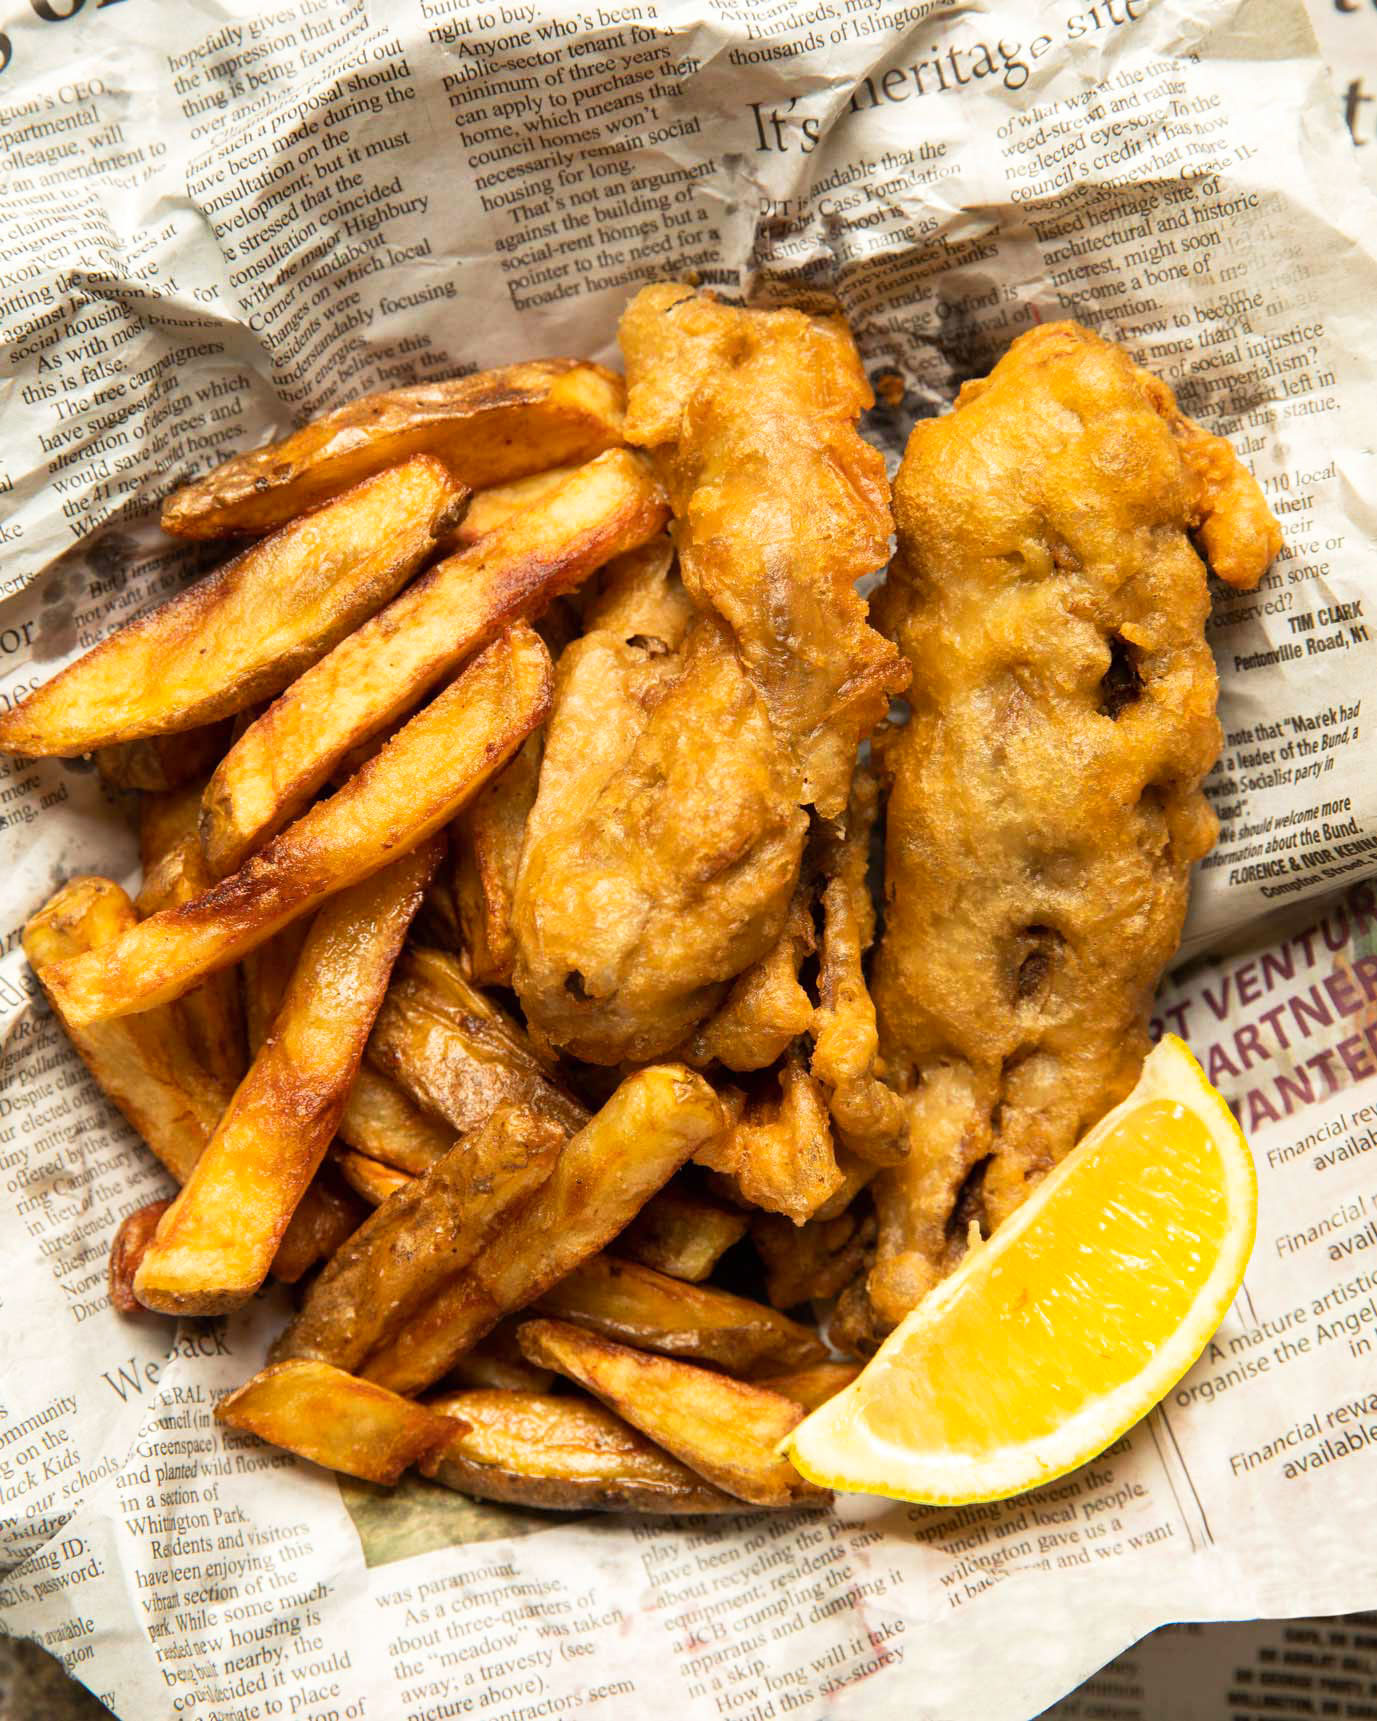 Fakeaway fish and chips recipe - BBC Food